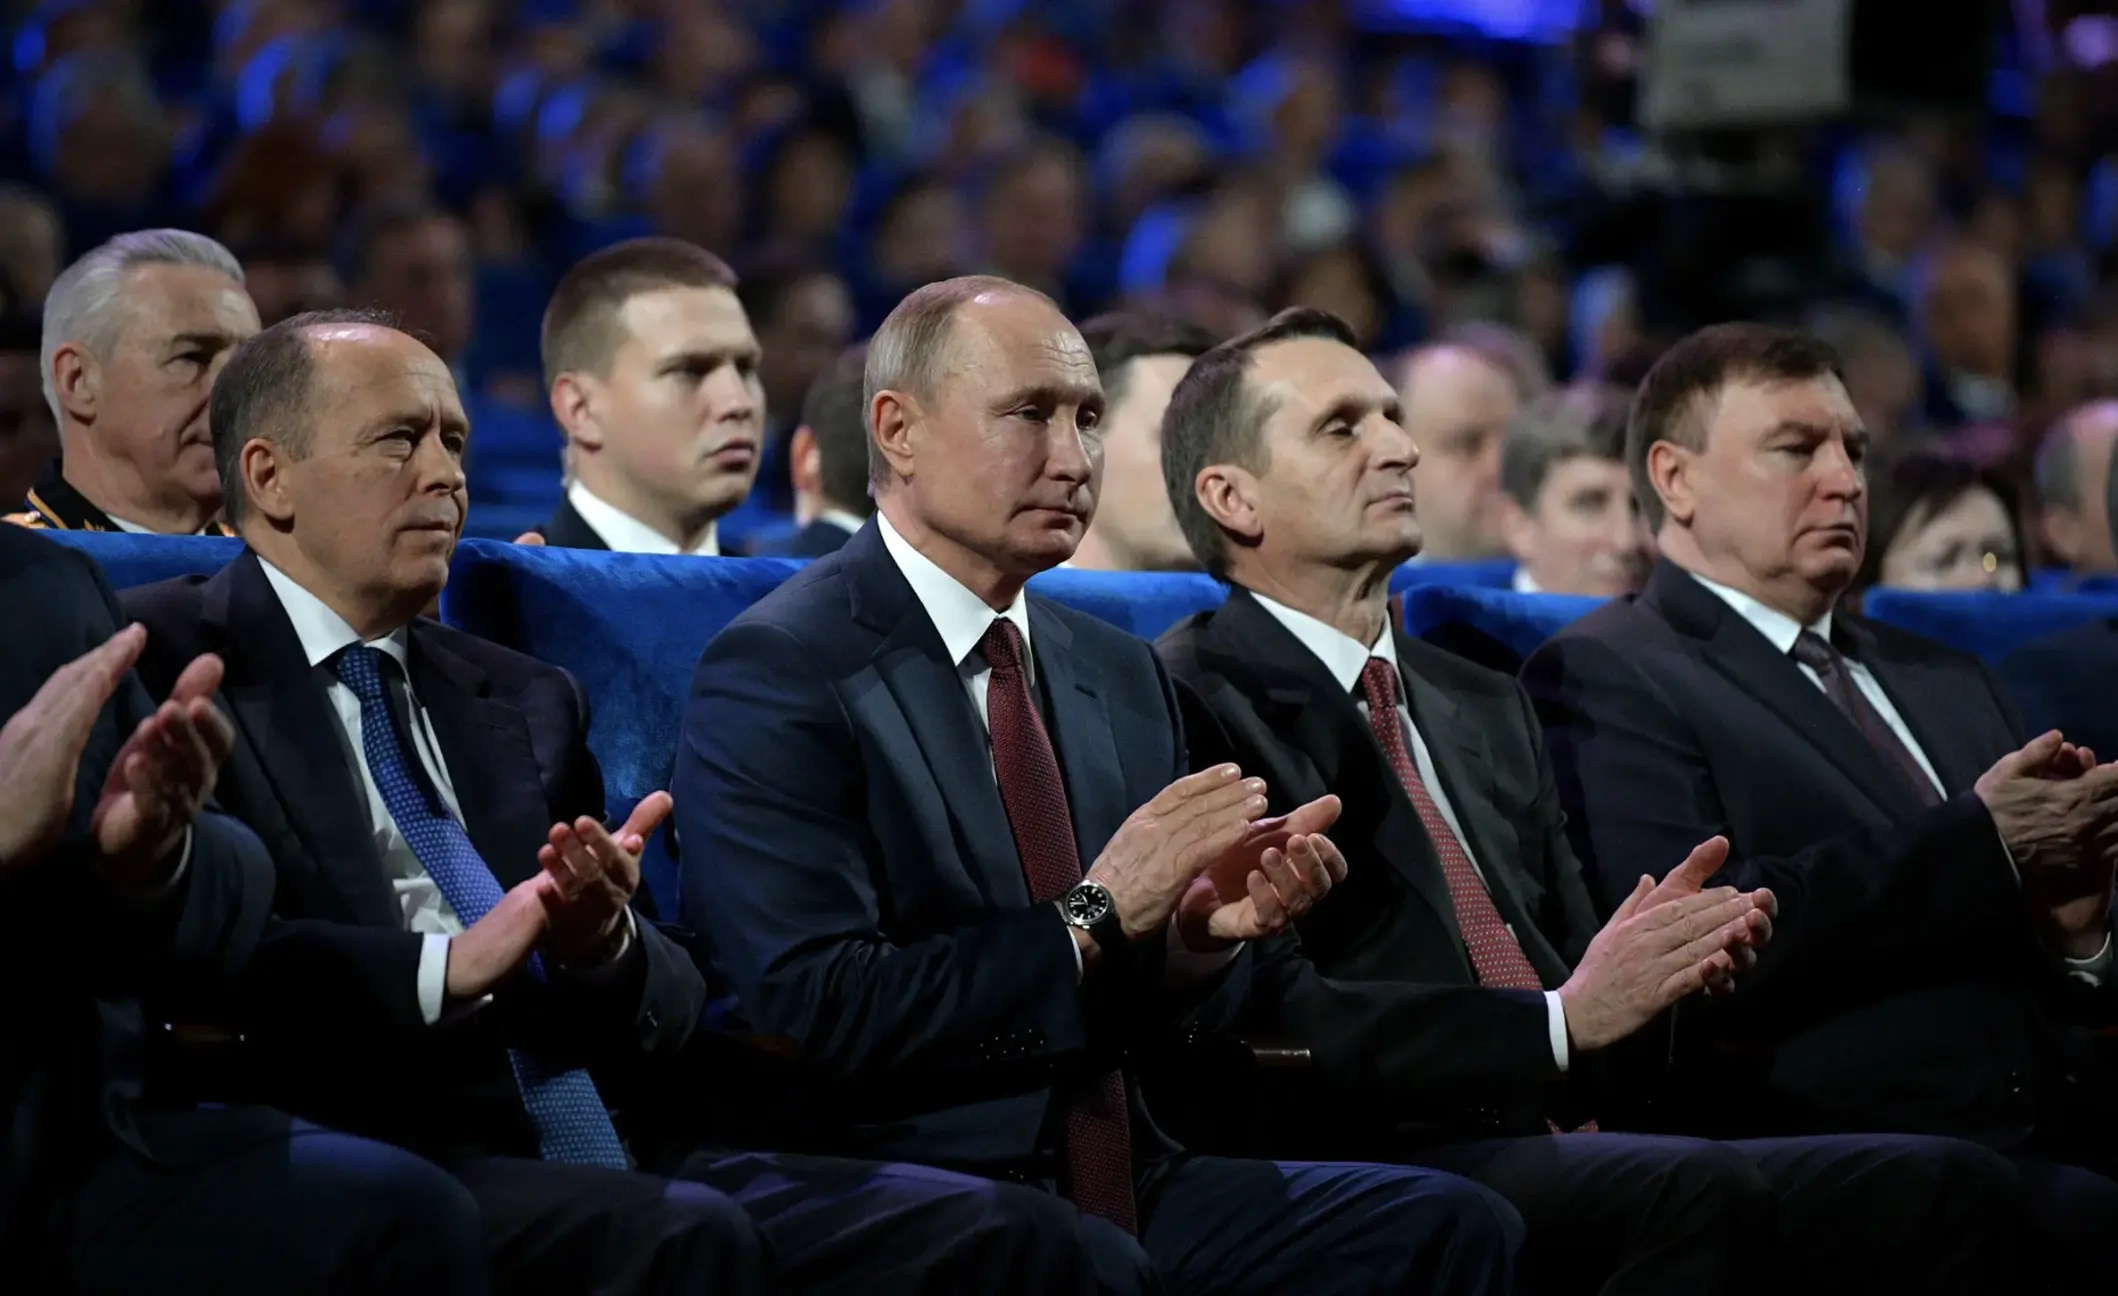 Put and members of Russia intelligence units clap together